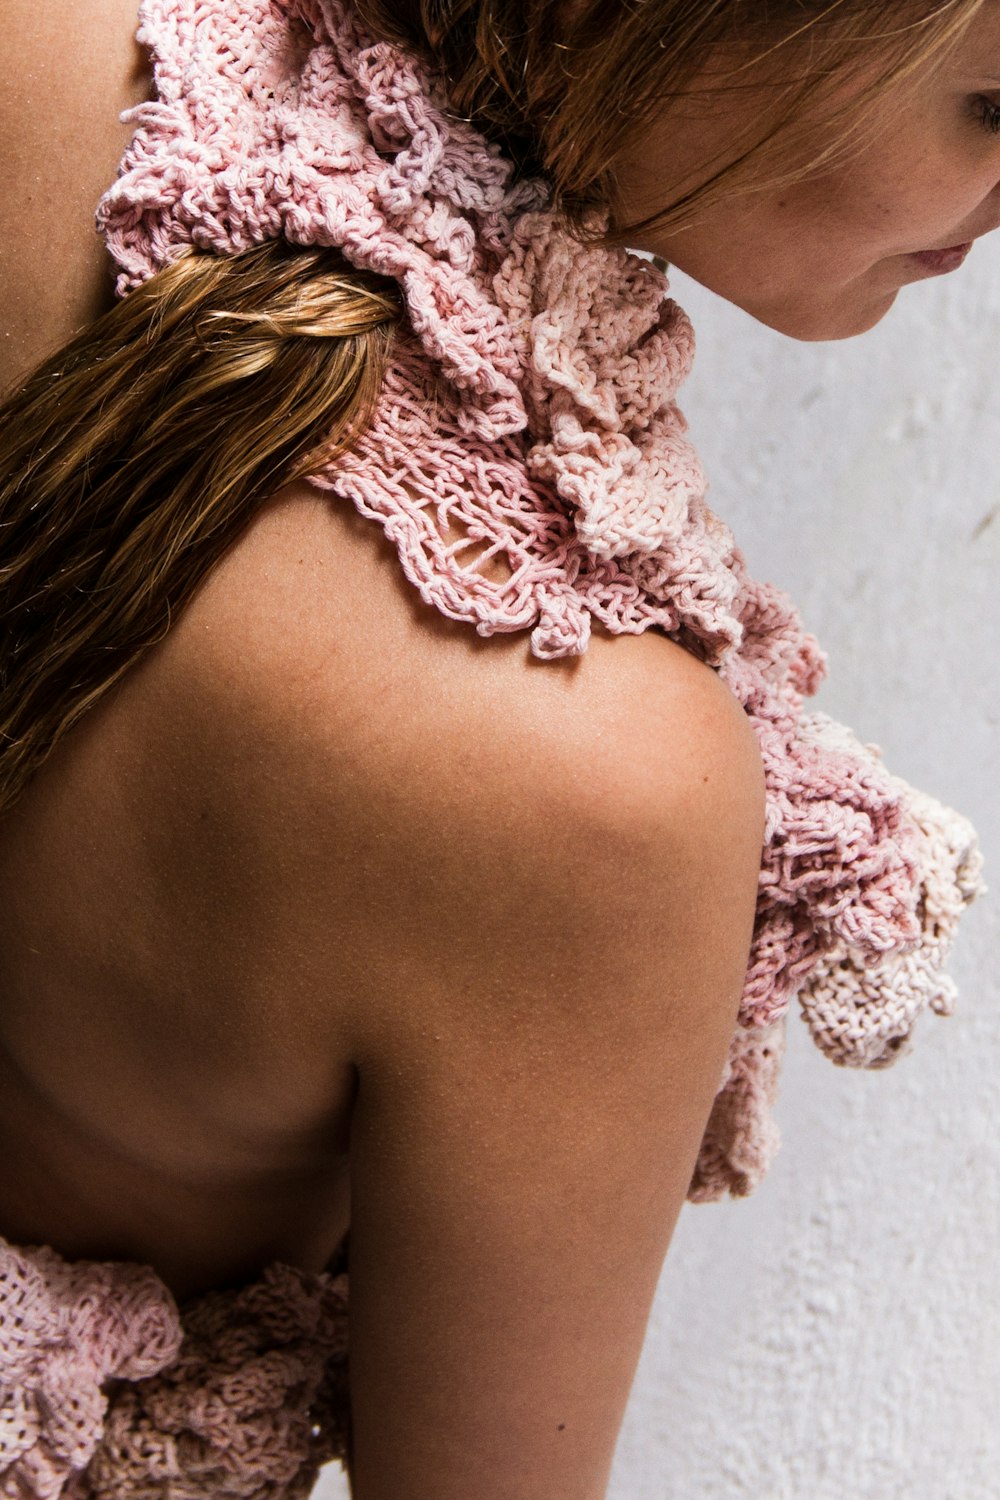 a close up of a woman wearing a pink top